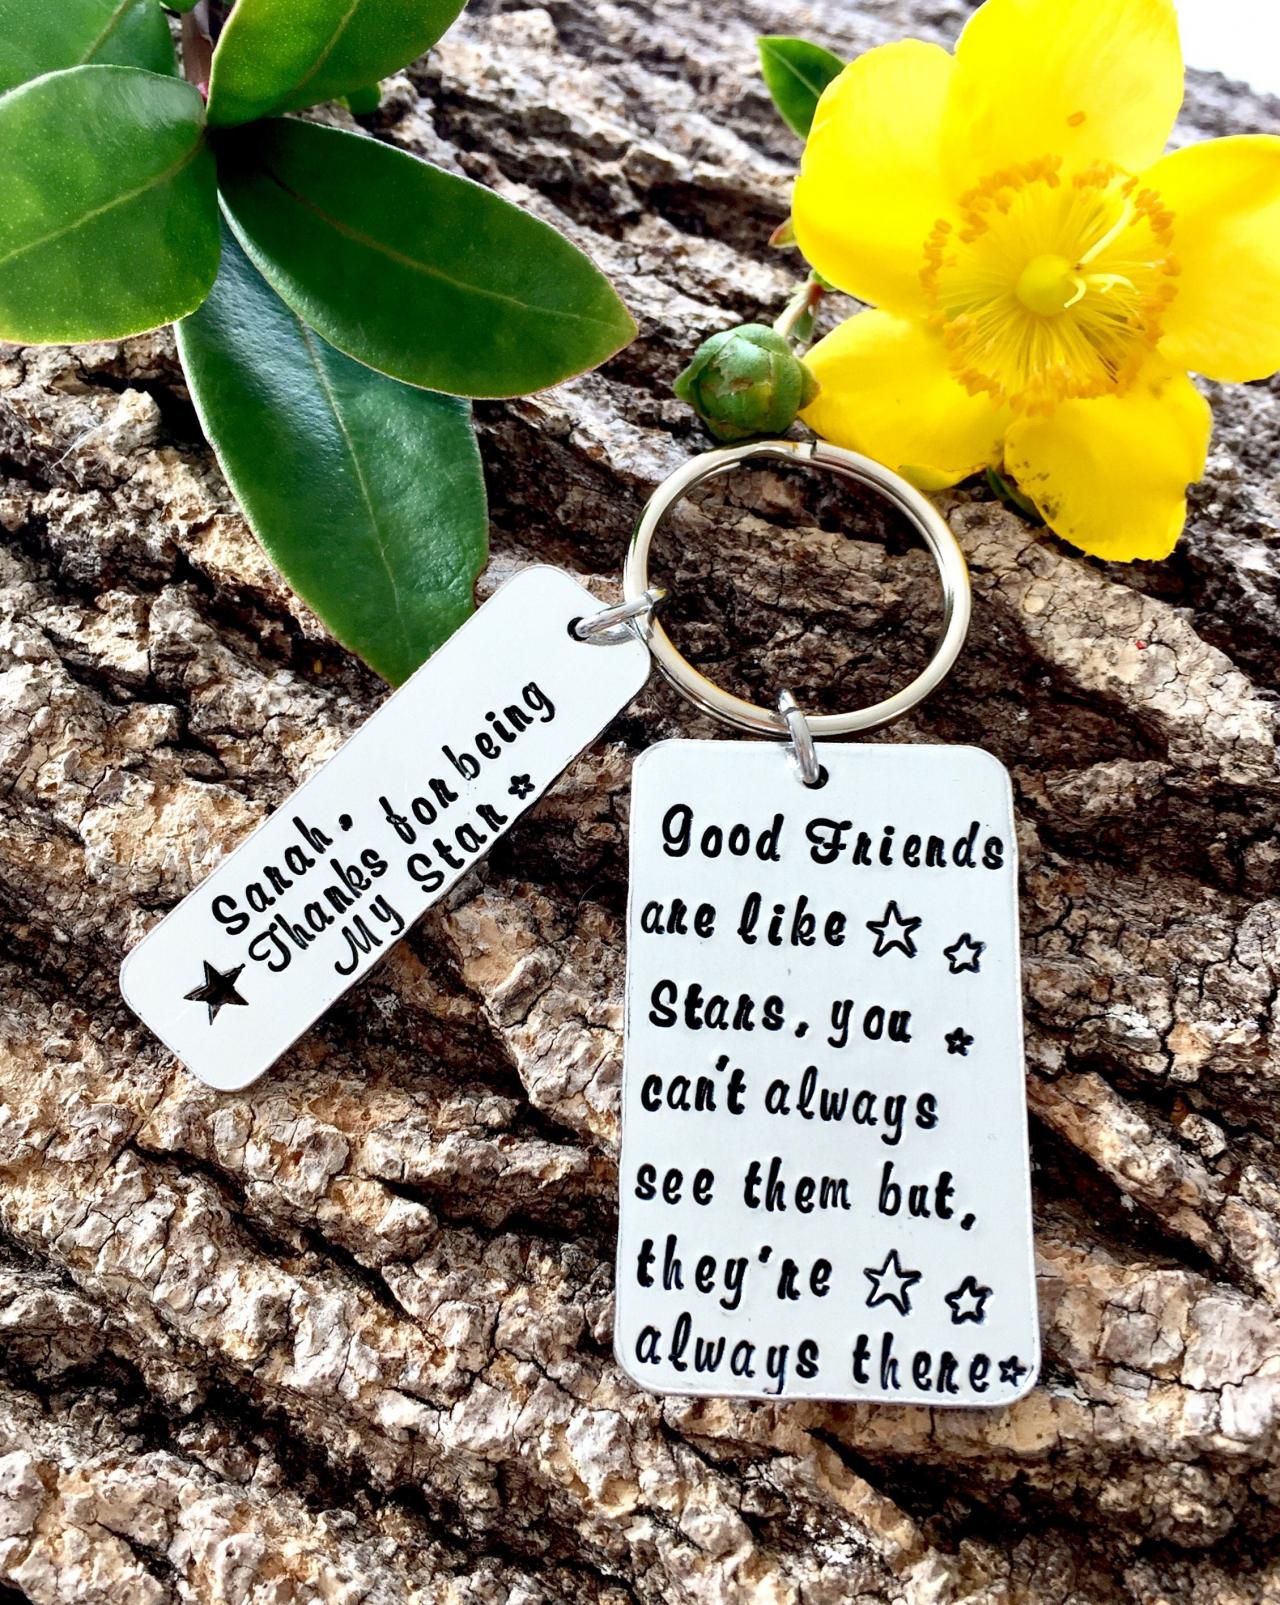 Best Friend Gift, Friend Gift, Best Friend Birthday, Friendship Gift, Friendship Quote, Personalized Gift, Gift for Her, Birthday Gift Ideas